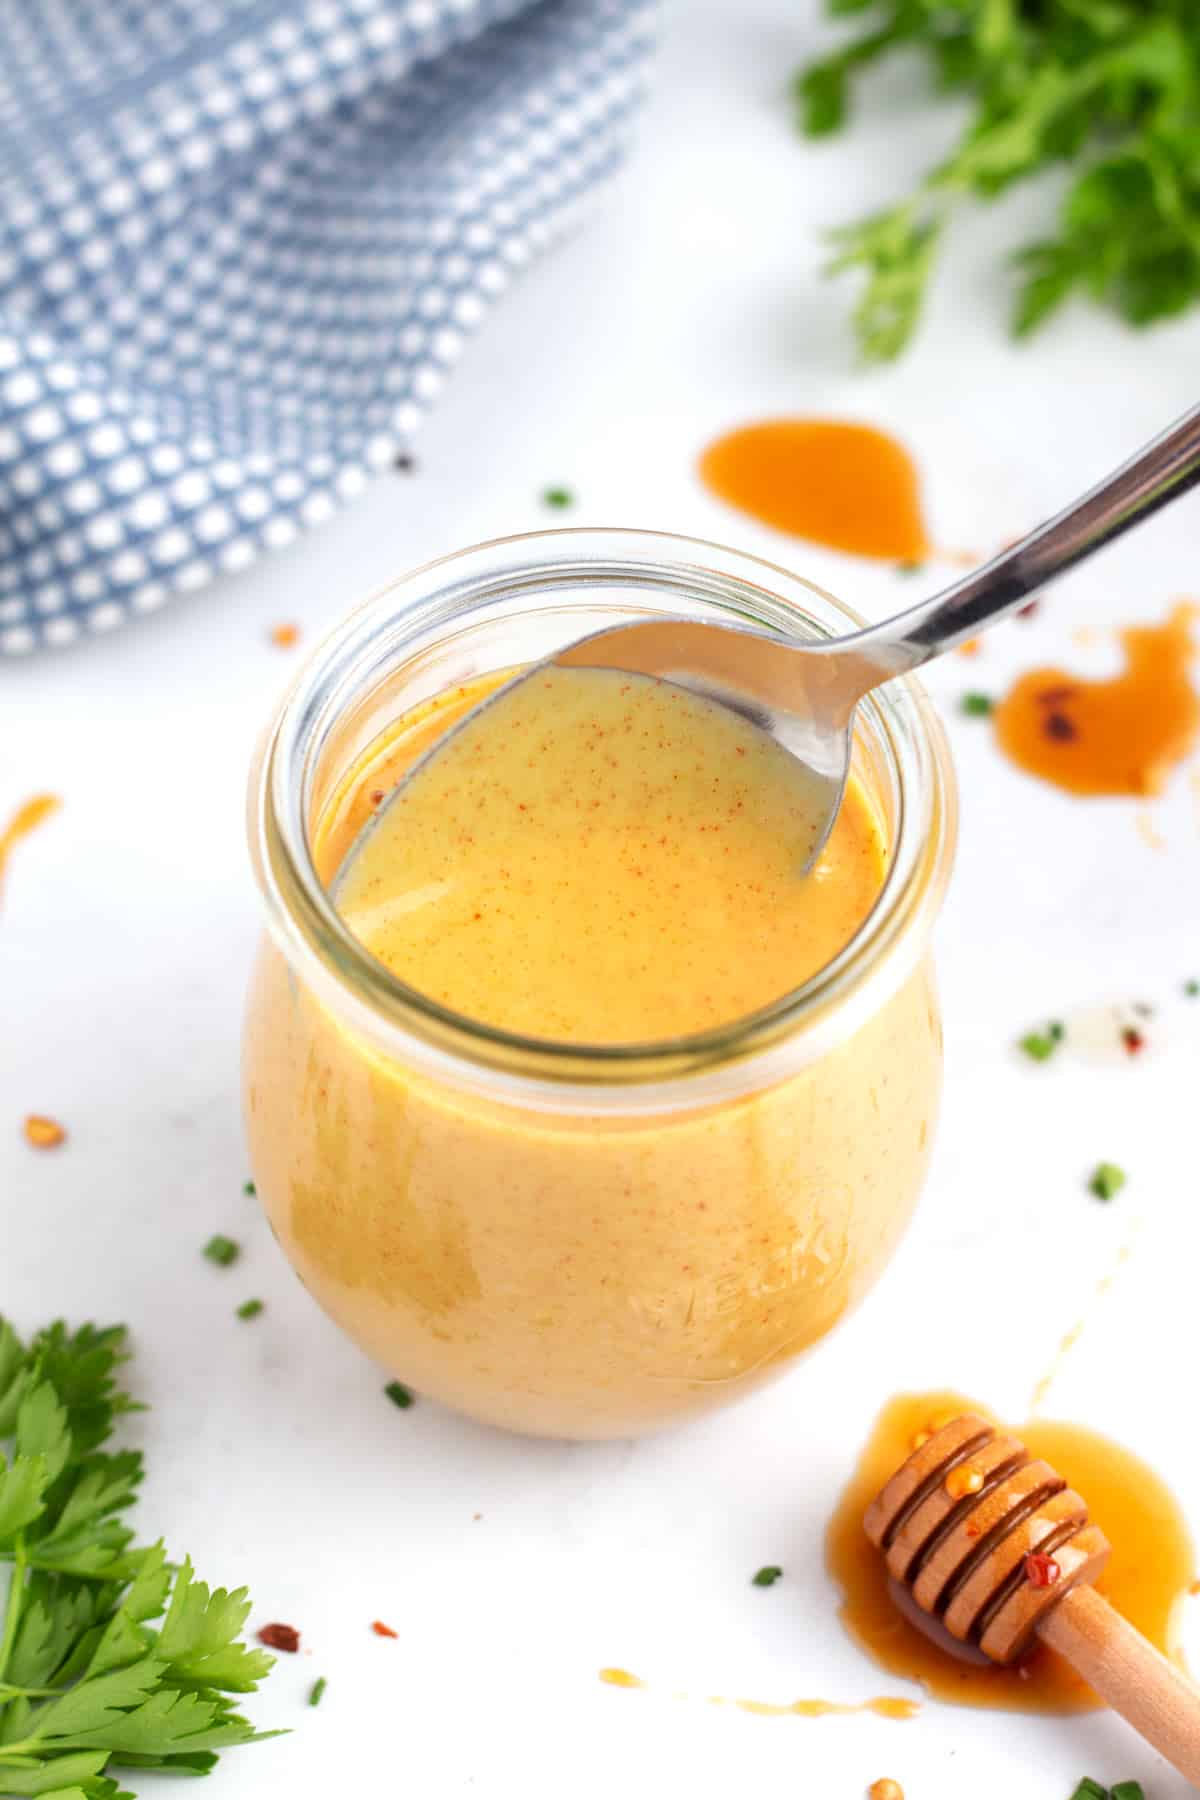 A silver spoon coming out of a jar of hot honey mustard surrounded by a honey stick, parsley, chives, and red pepper flakes on the counter.